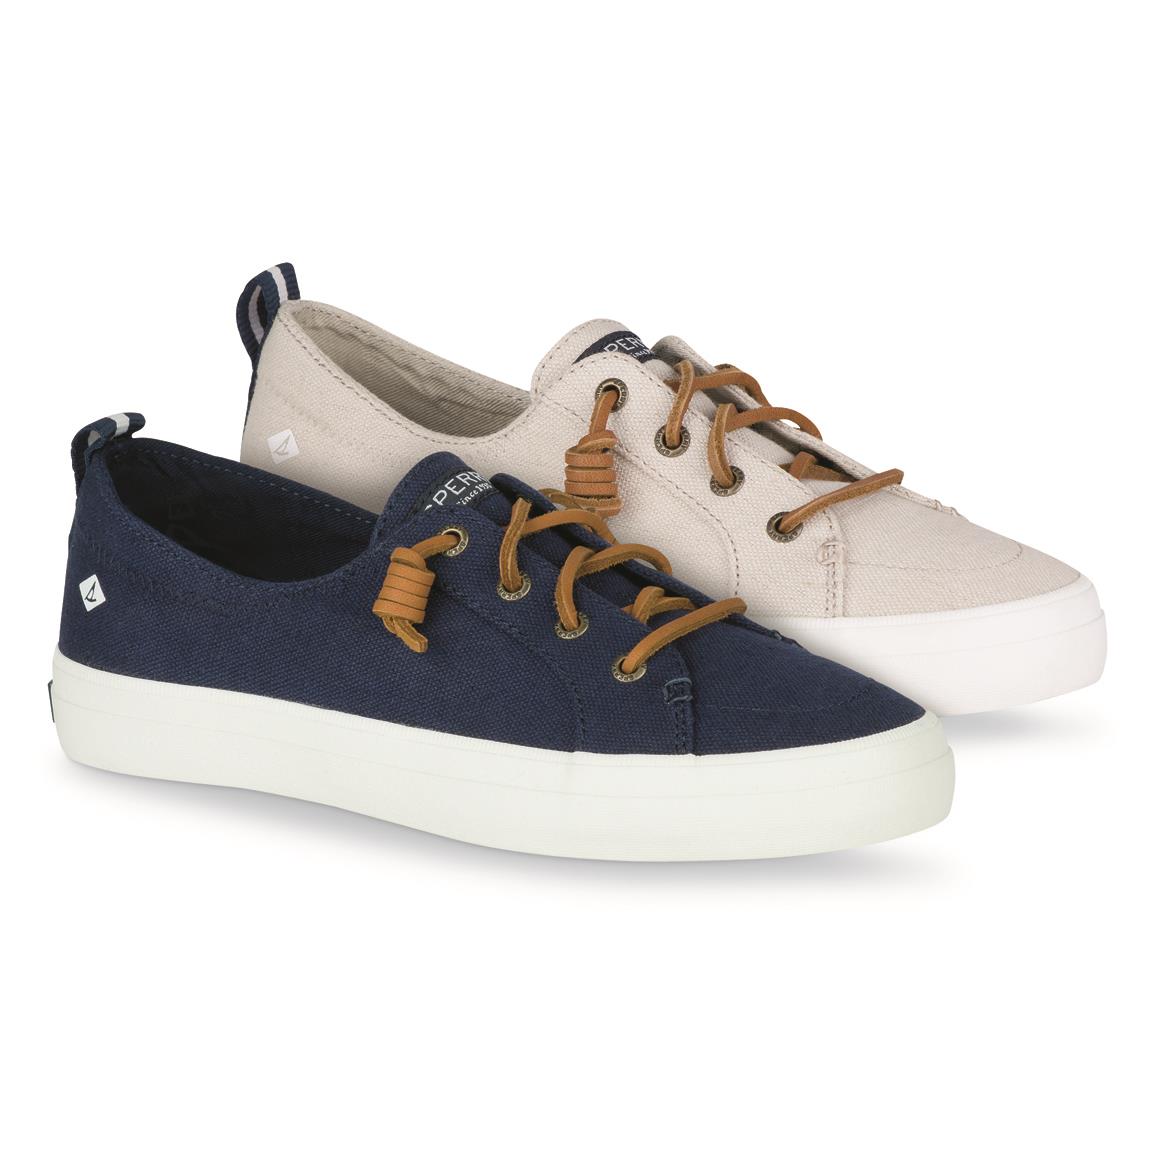 Sperry Women S Crest Vibe Sneakers 703714 Casual Shoes At Sportsman S Guide